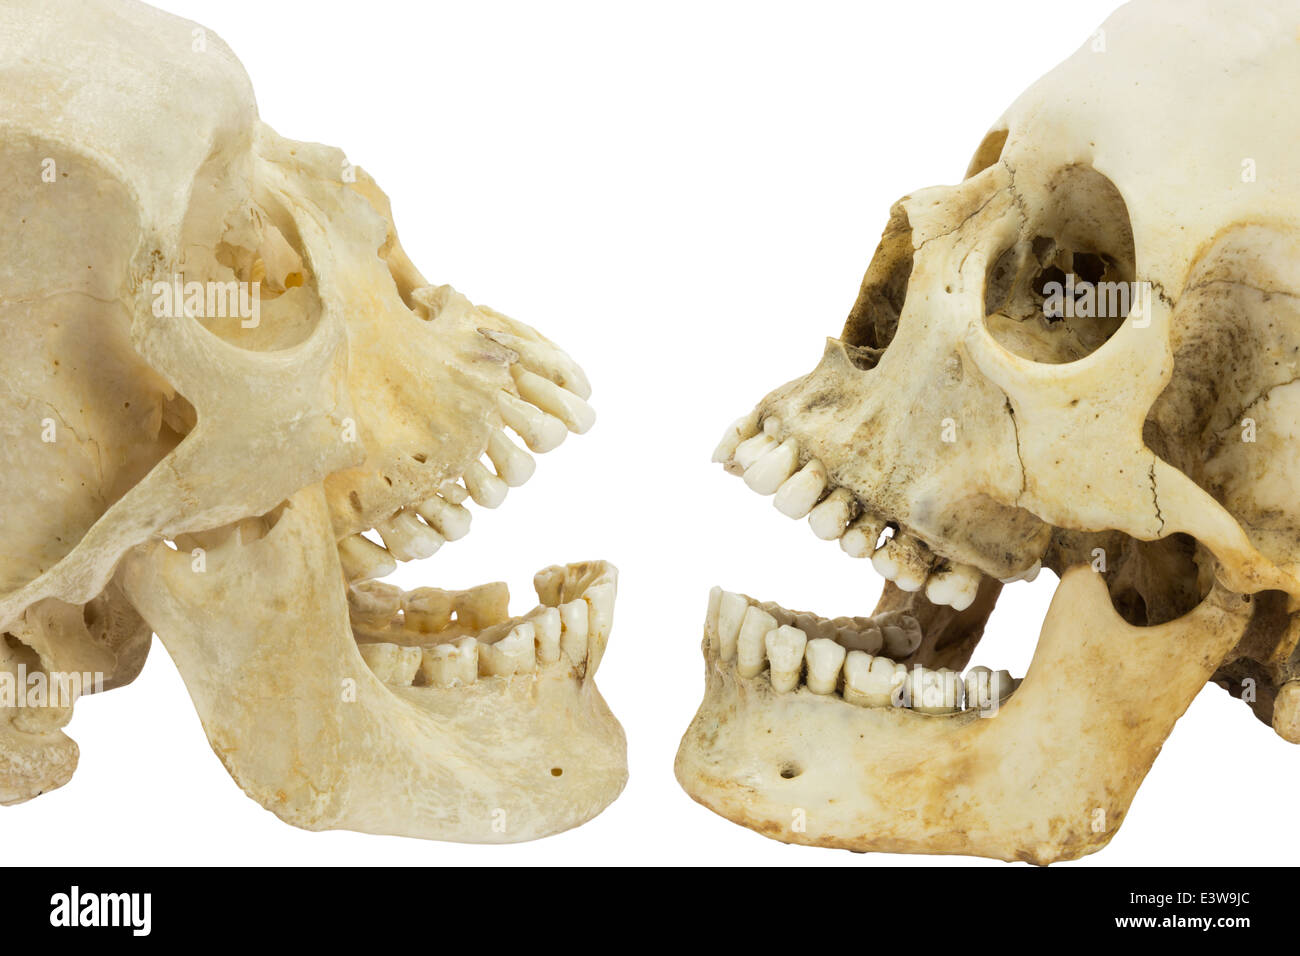 Two human skulls opposite of each other Stock Photo